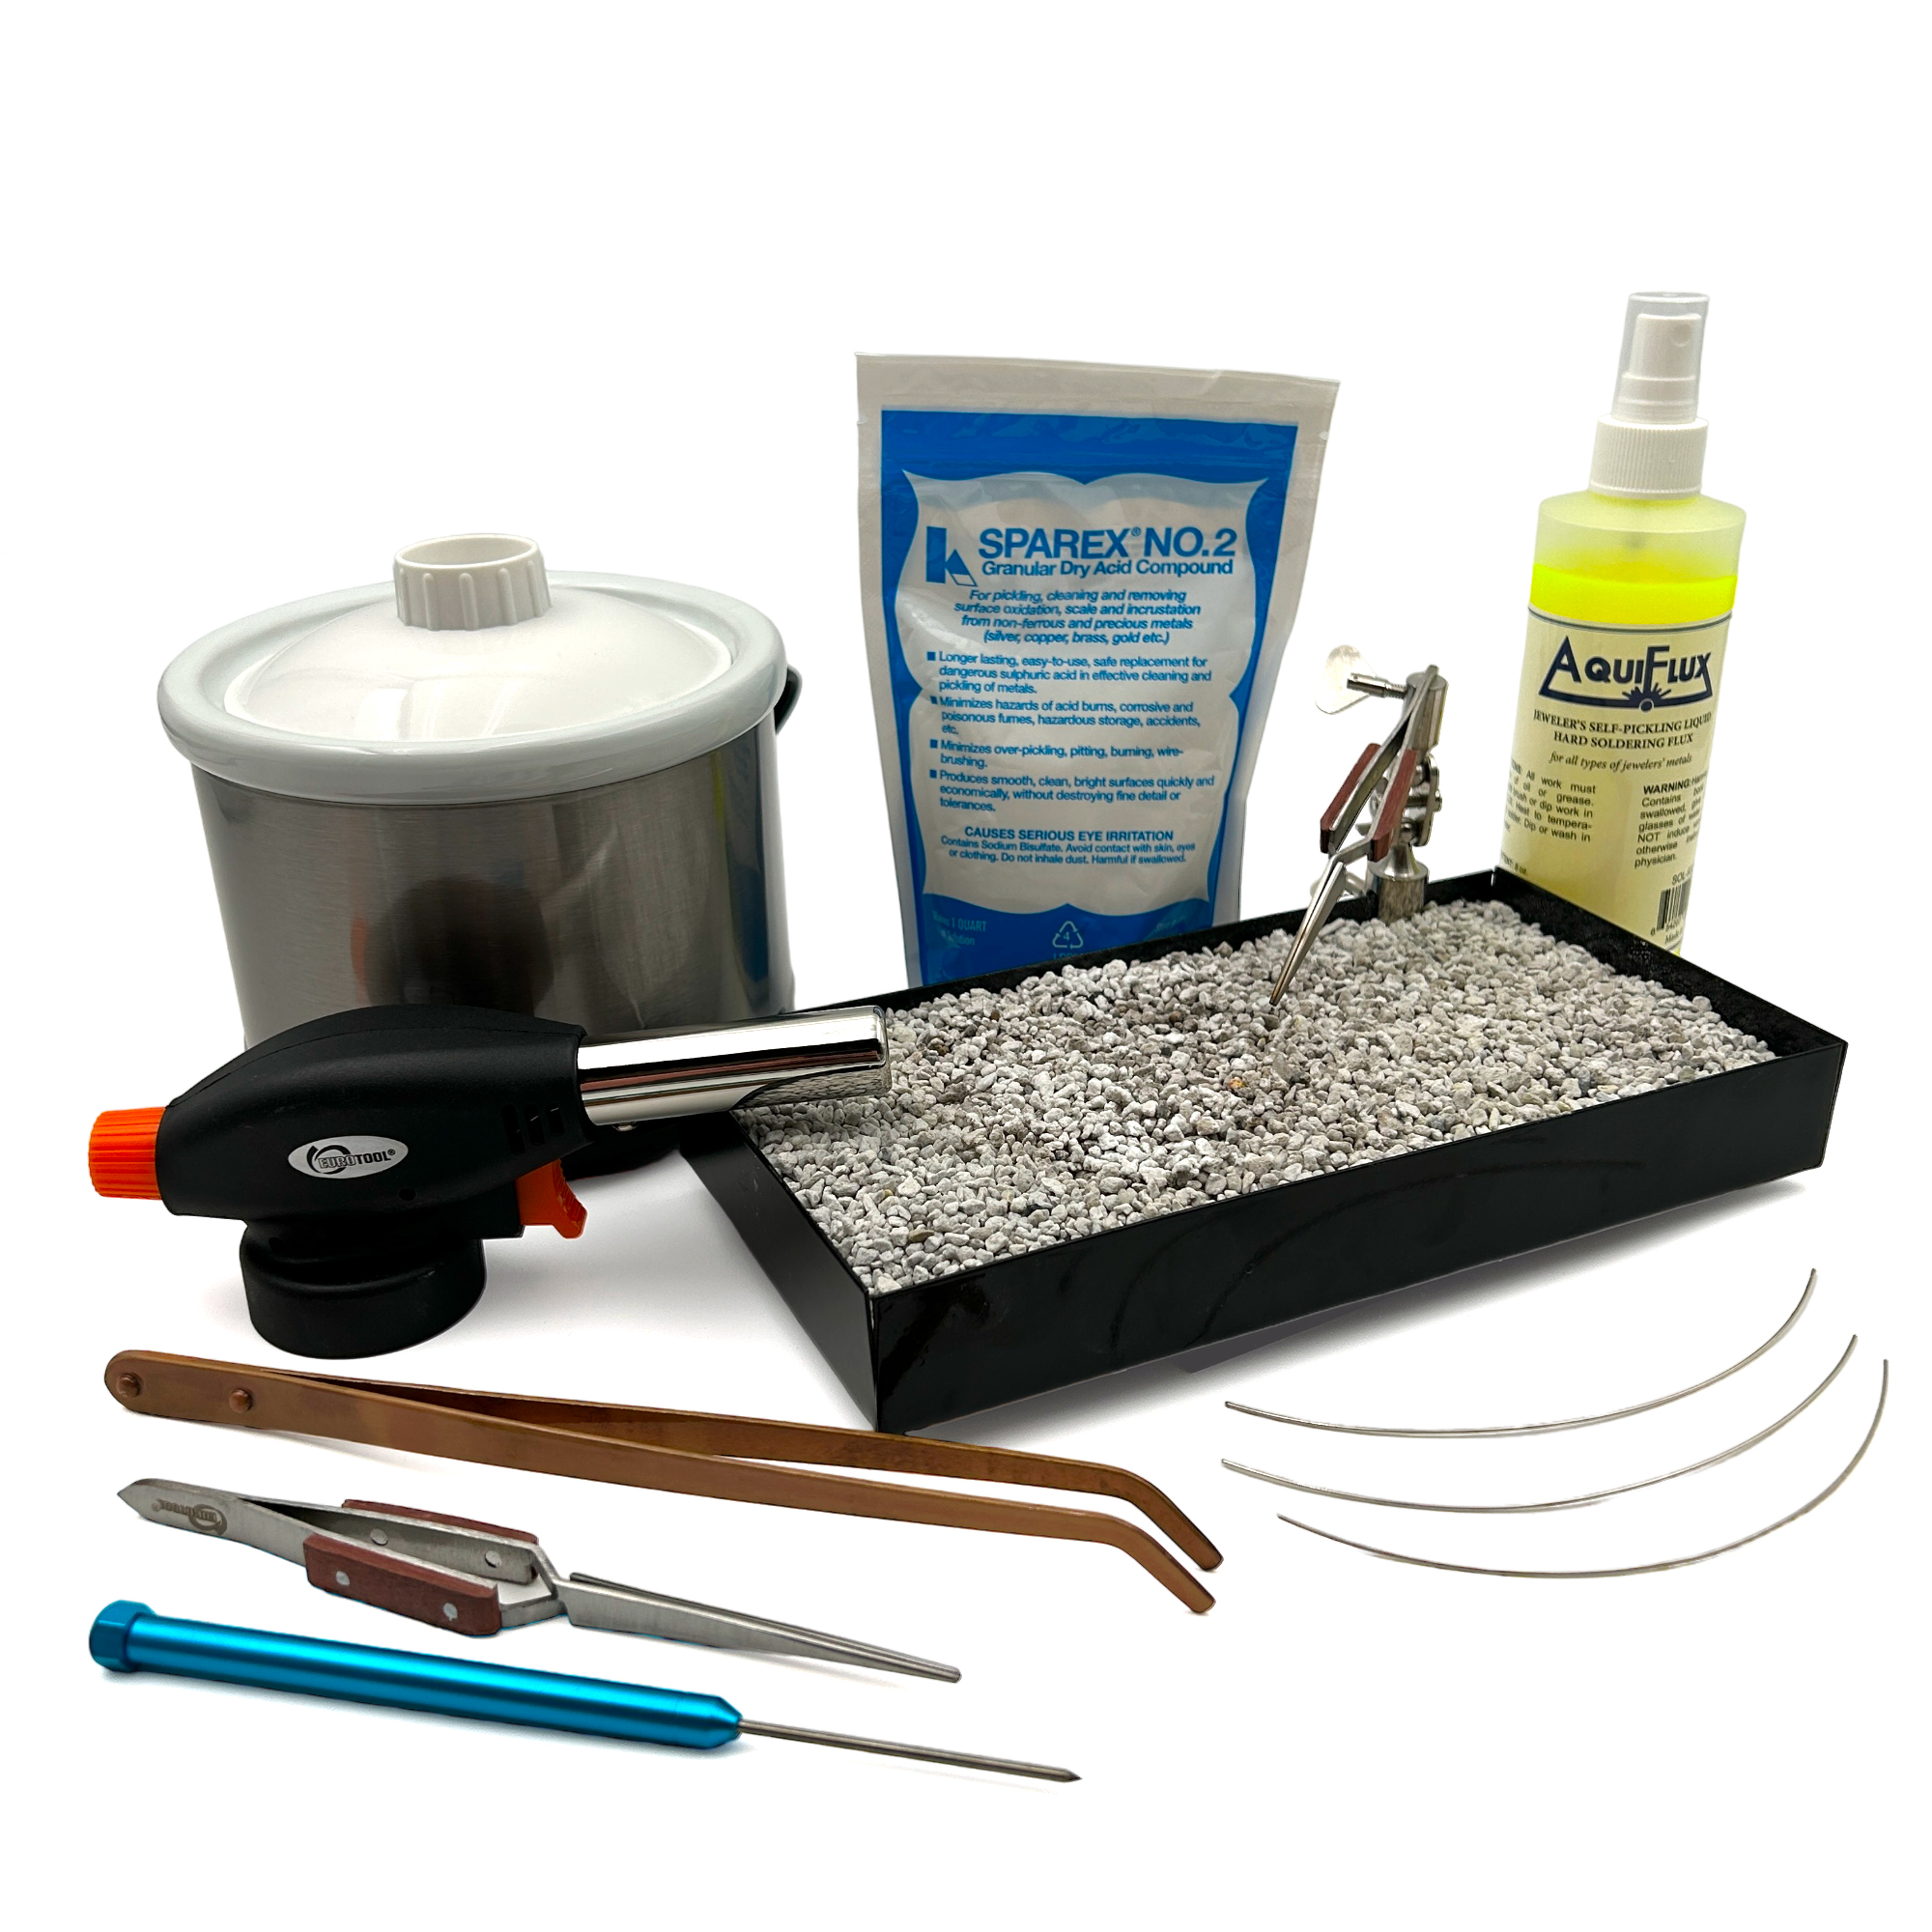 Jewelry Soldering Kit with Pickle Pot, 10 Oz Sparex Compound